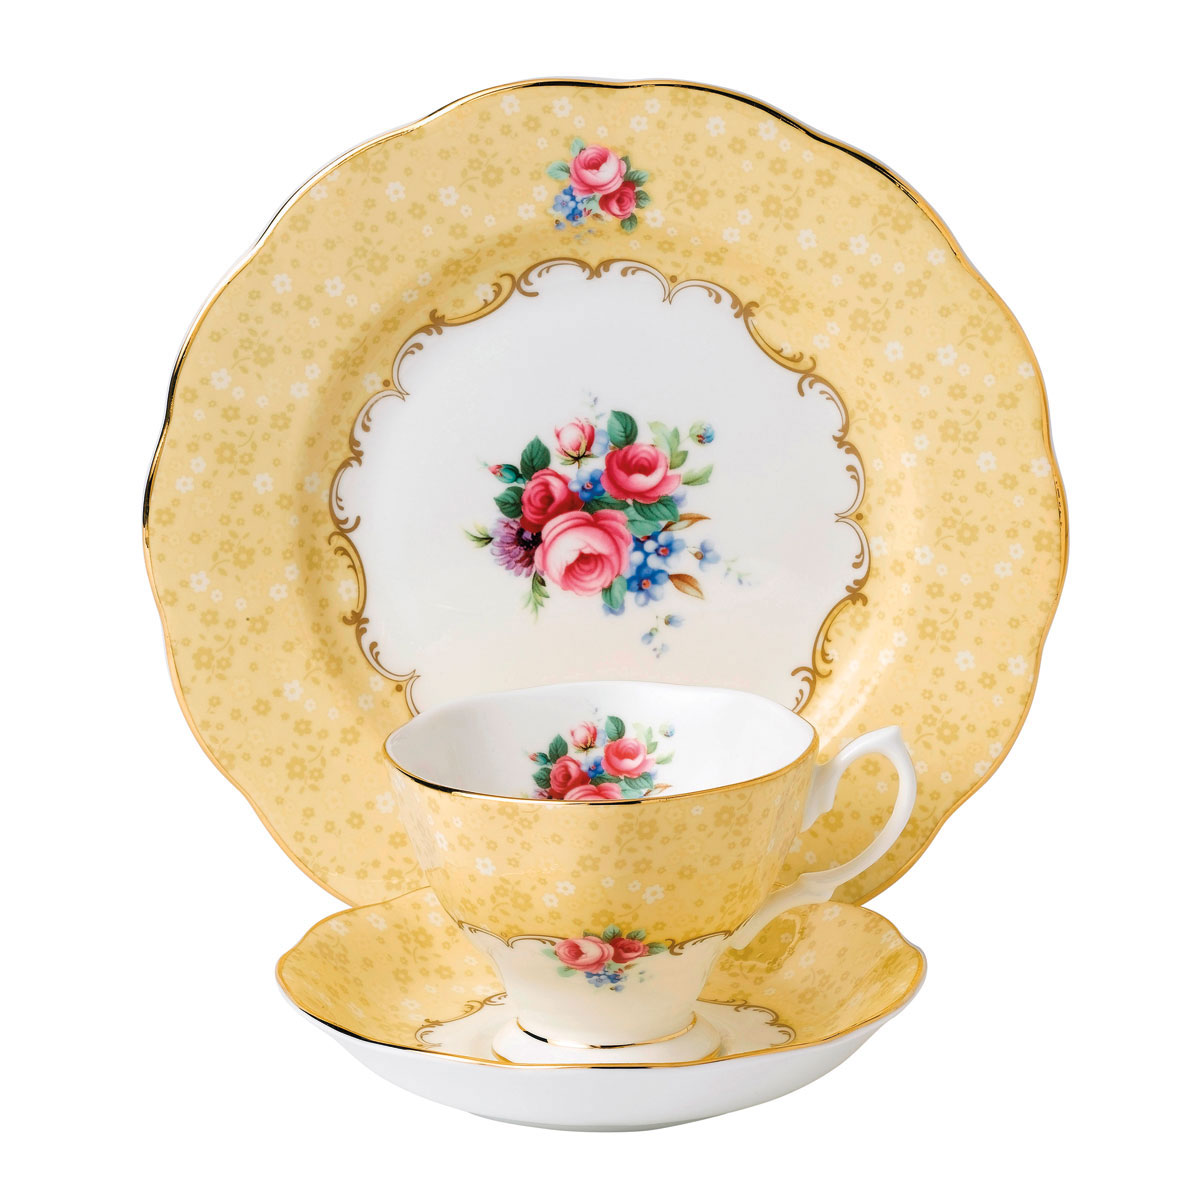 Royal Albert 100 Years 1990 Teacup, Saucer and 8" Plate Setbouquet